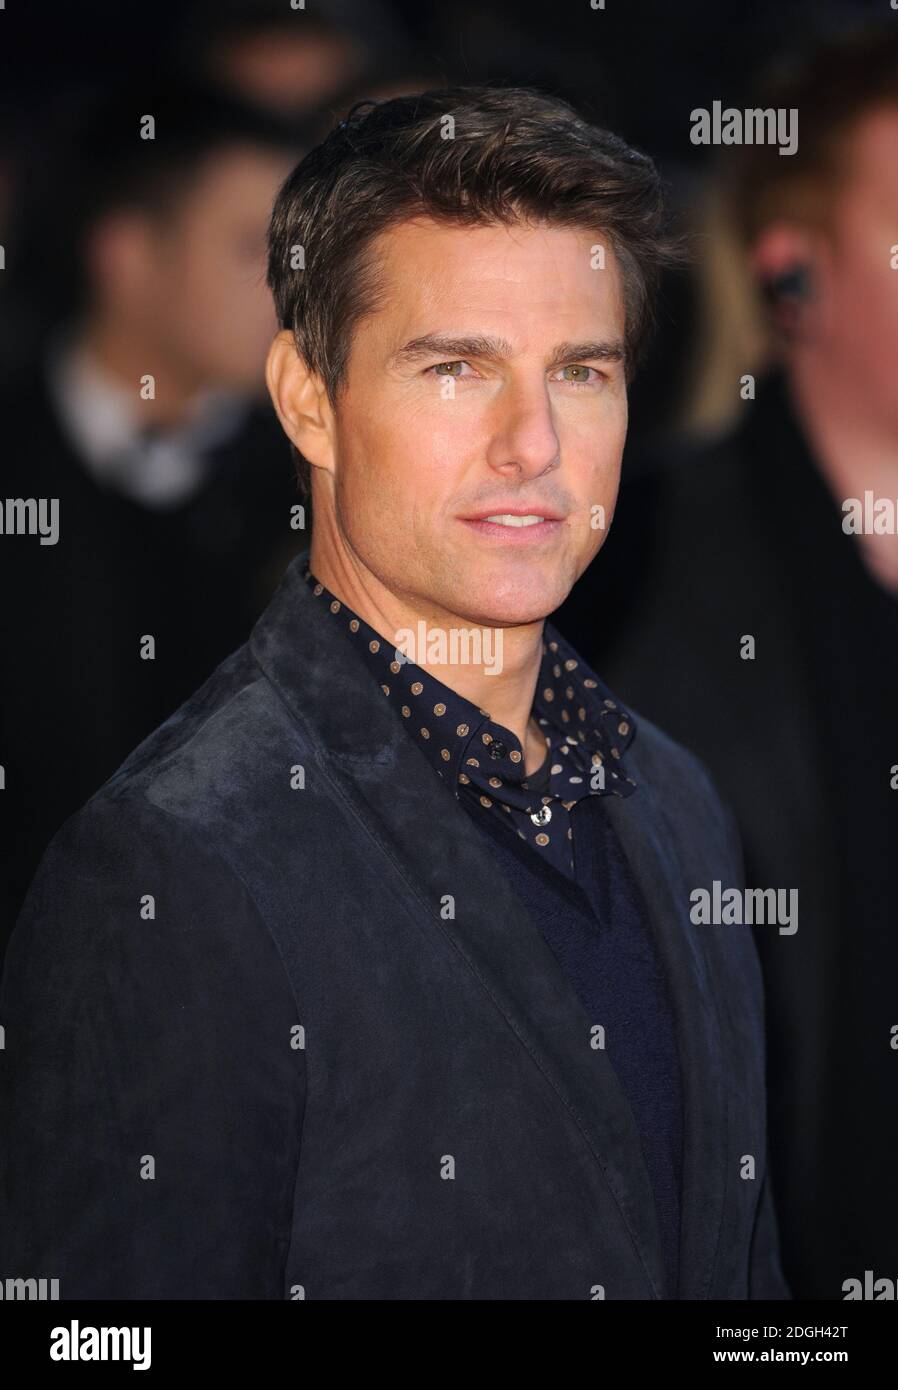 Tom Cruise arriving at the World Premiere of Jack Reacher, Odeon Cinema ...